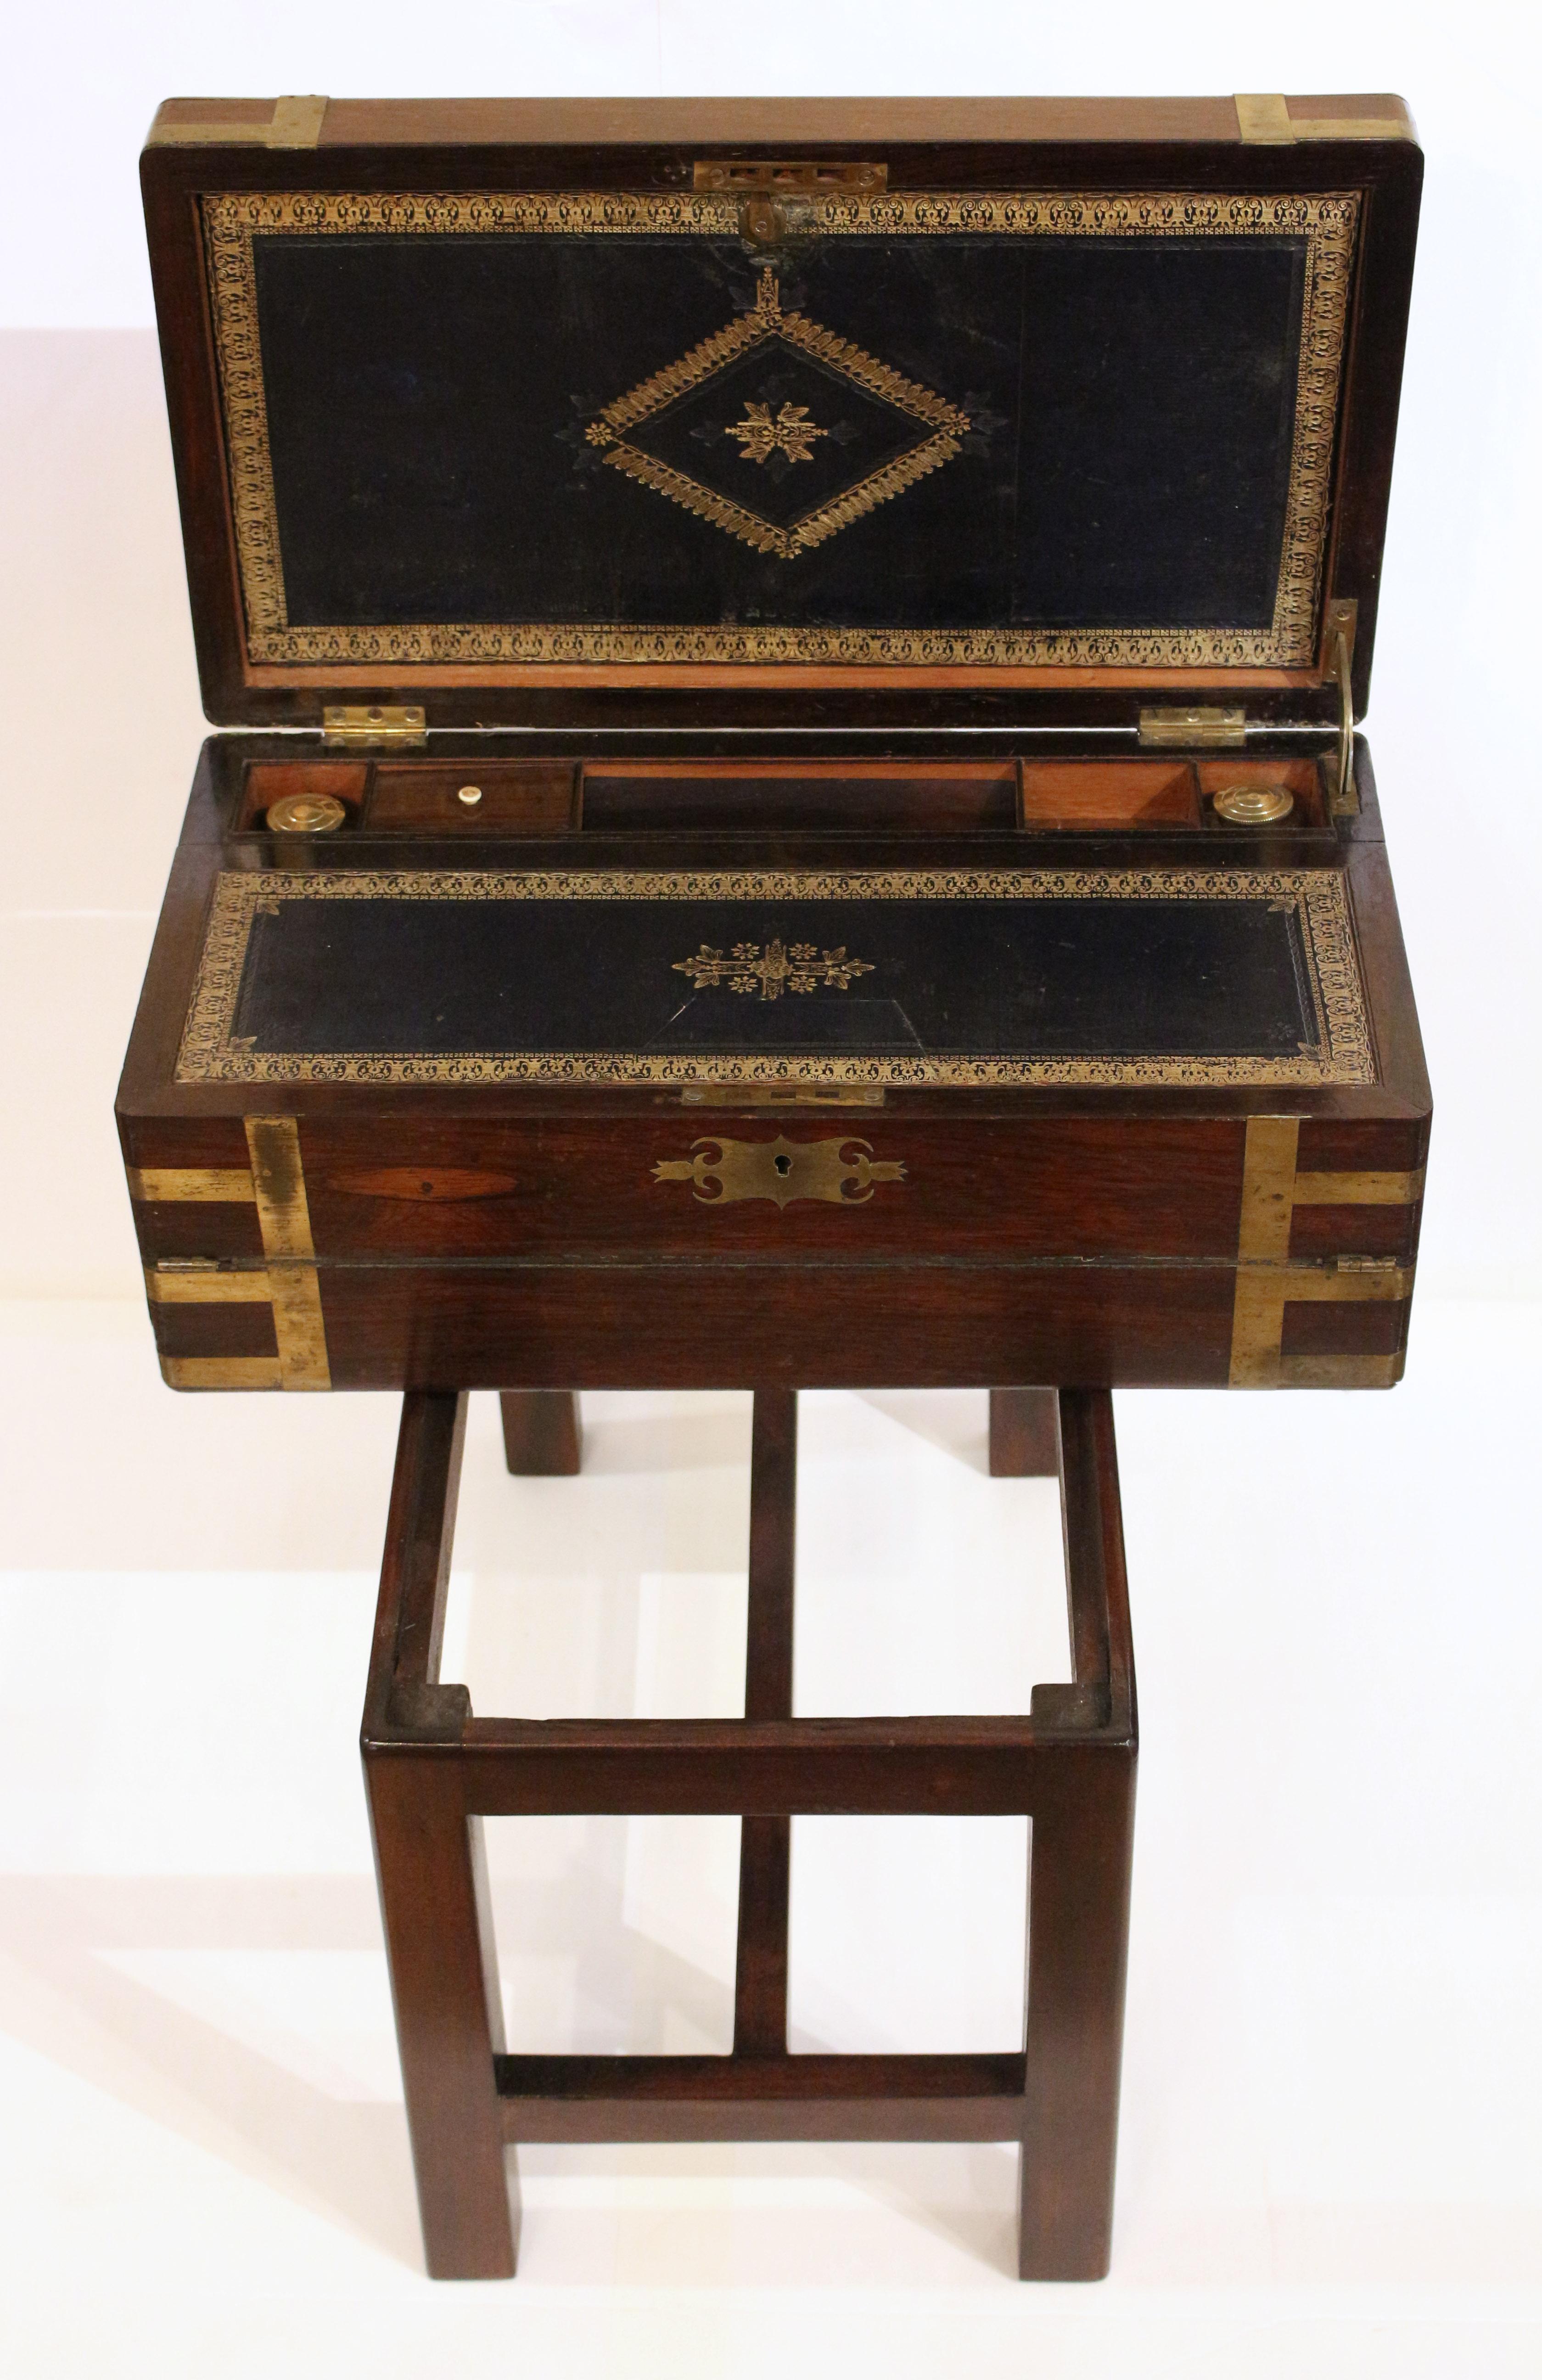 Brass Early 19th Century English Campaign Lap Desk Box on Stand Side Table